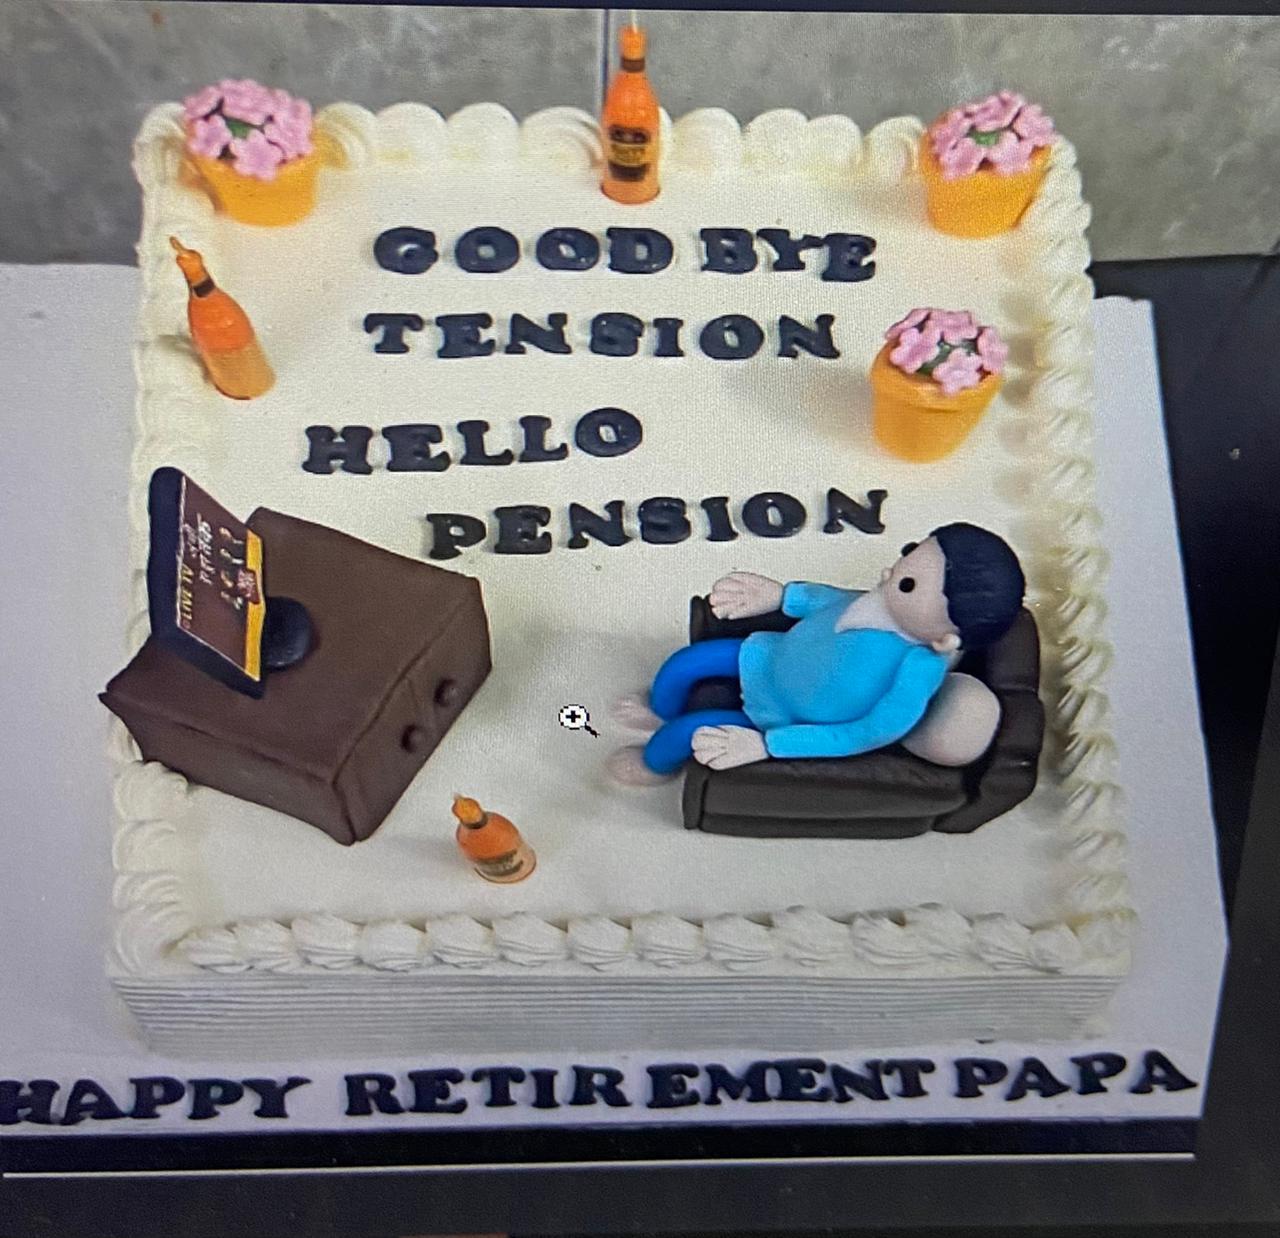 They were supposed to bake a retirement cake instead they roasted him -  Meme Guy